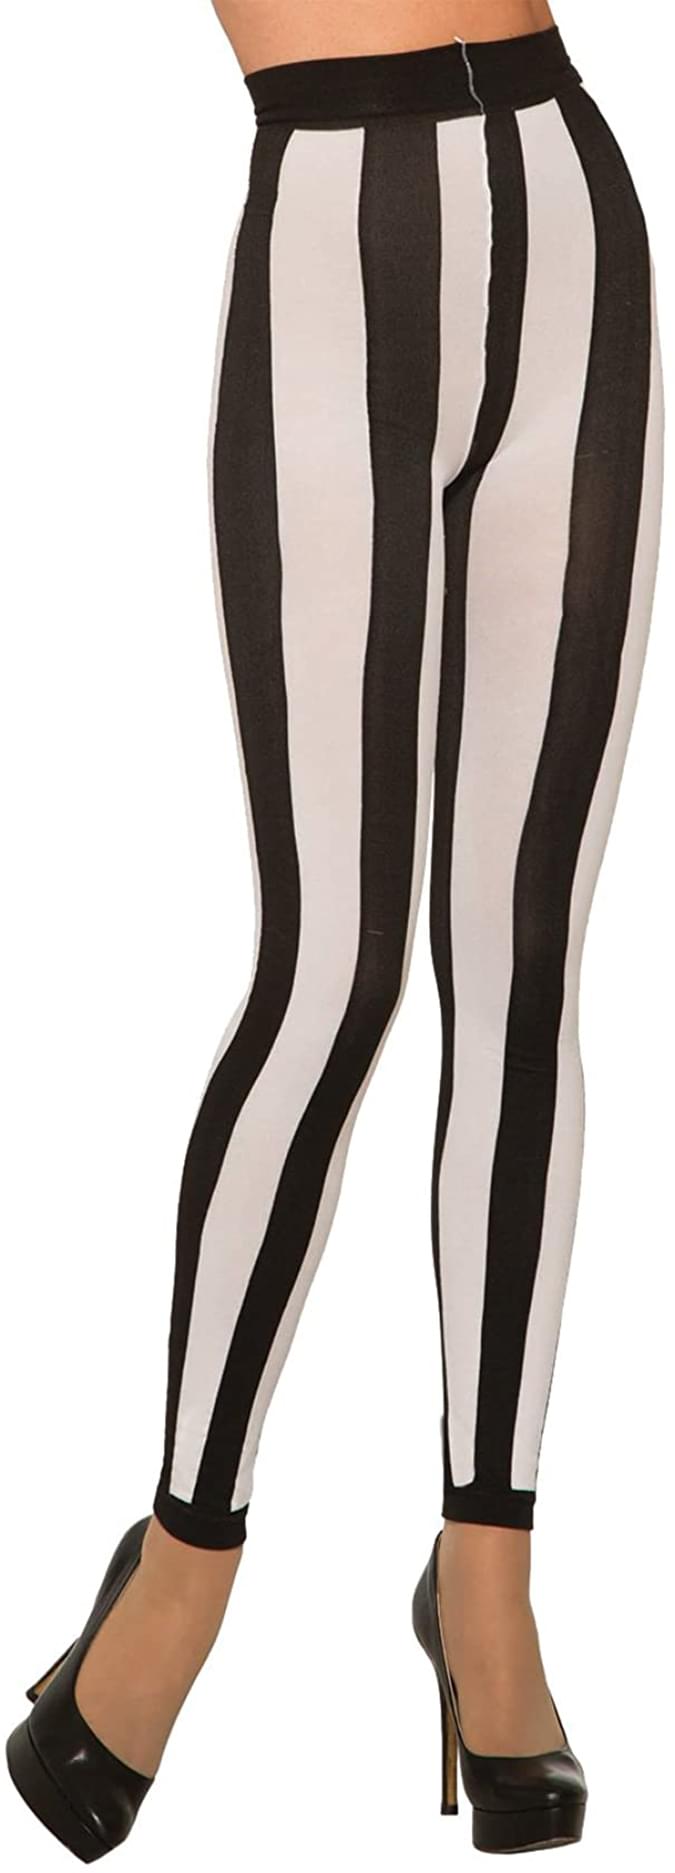 Pirate Women's Costume Tights, Footless